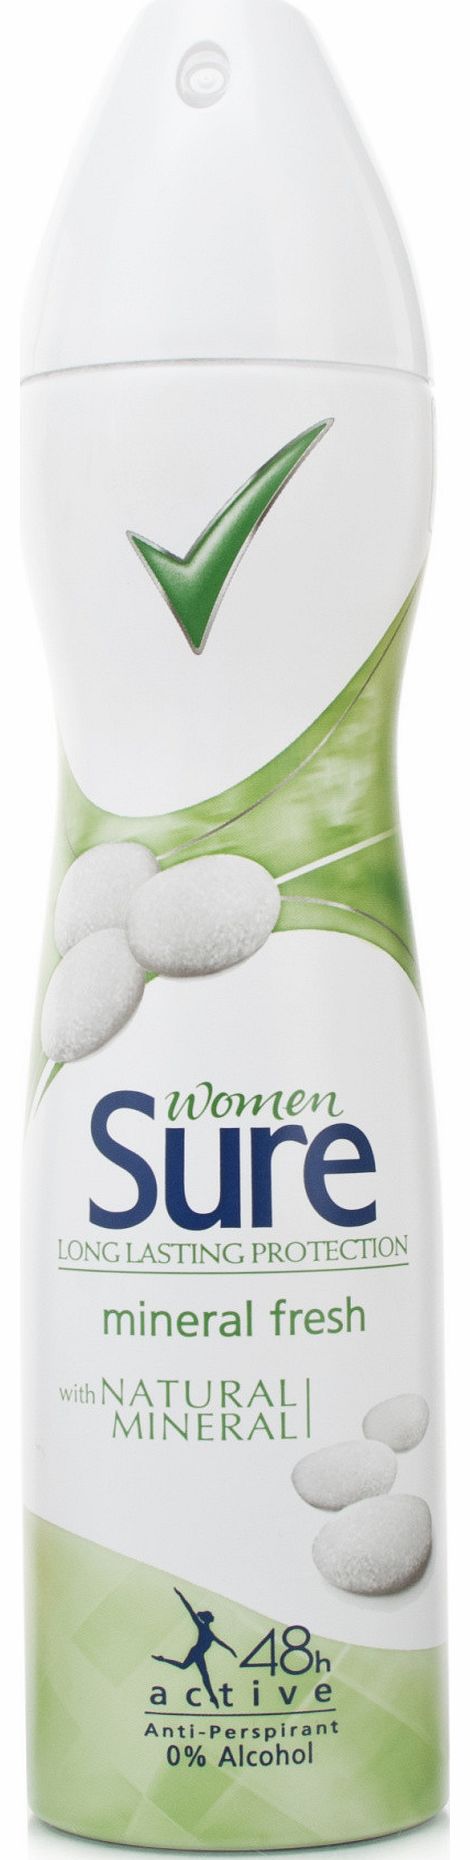 Sure Women Mineral Fresh with Natural Minerals